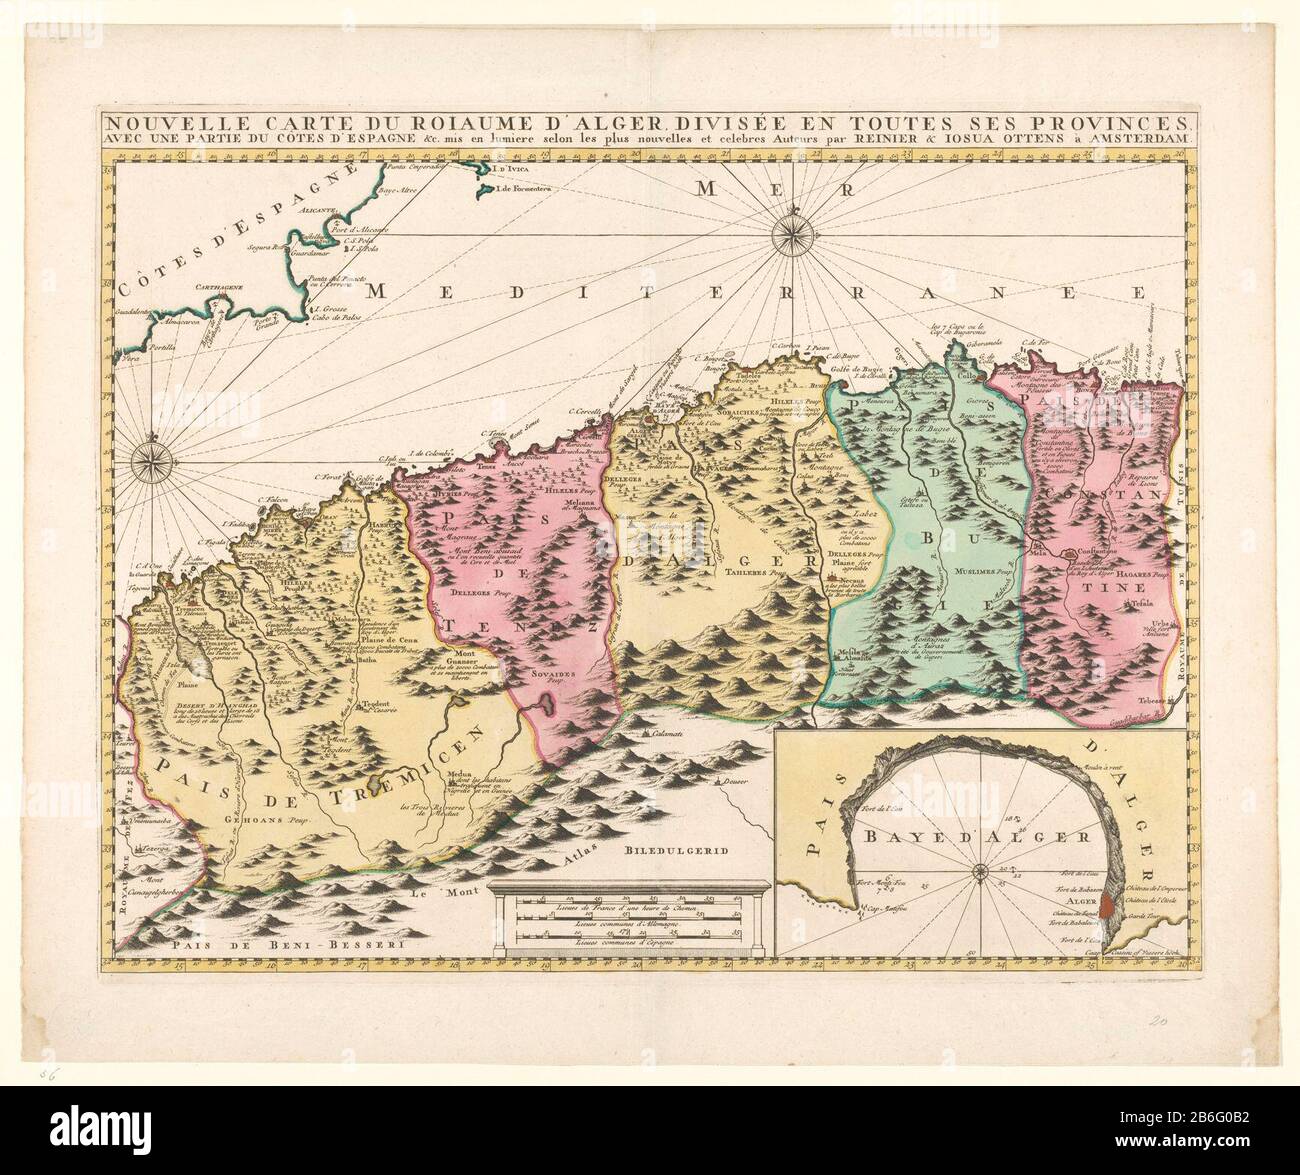 Cartography In The Netherlands Algeria Map With One Inset Map Of Algeria Yellow Border Areas Colored With One Inset Map Map Of The Bay Of Algeria Here Compass Rose Reversed North Is